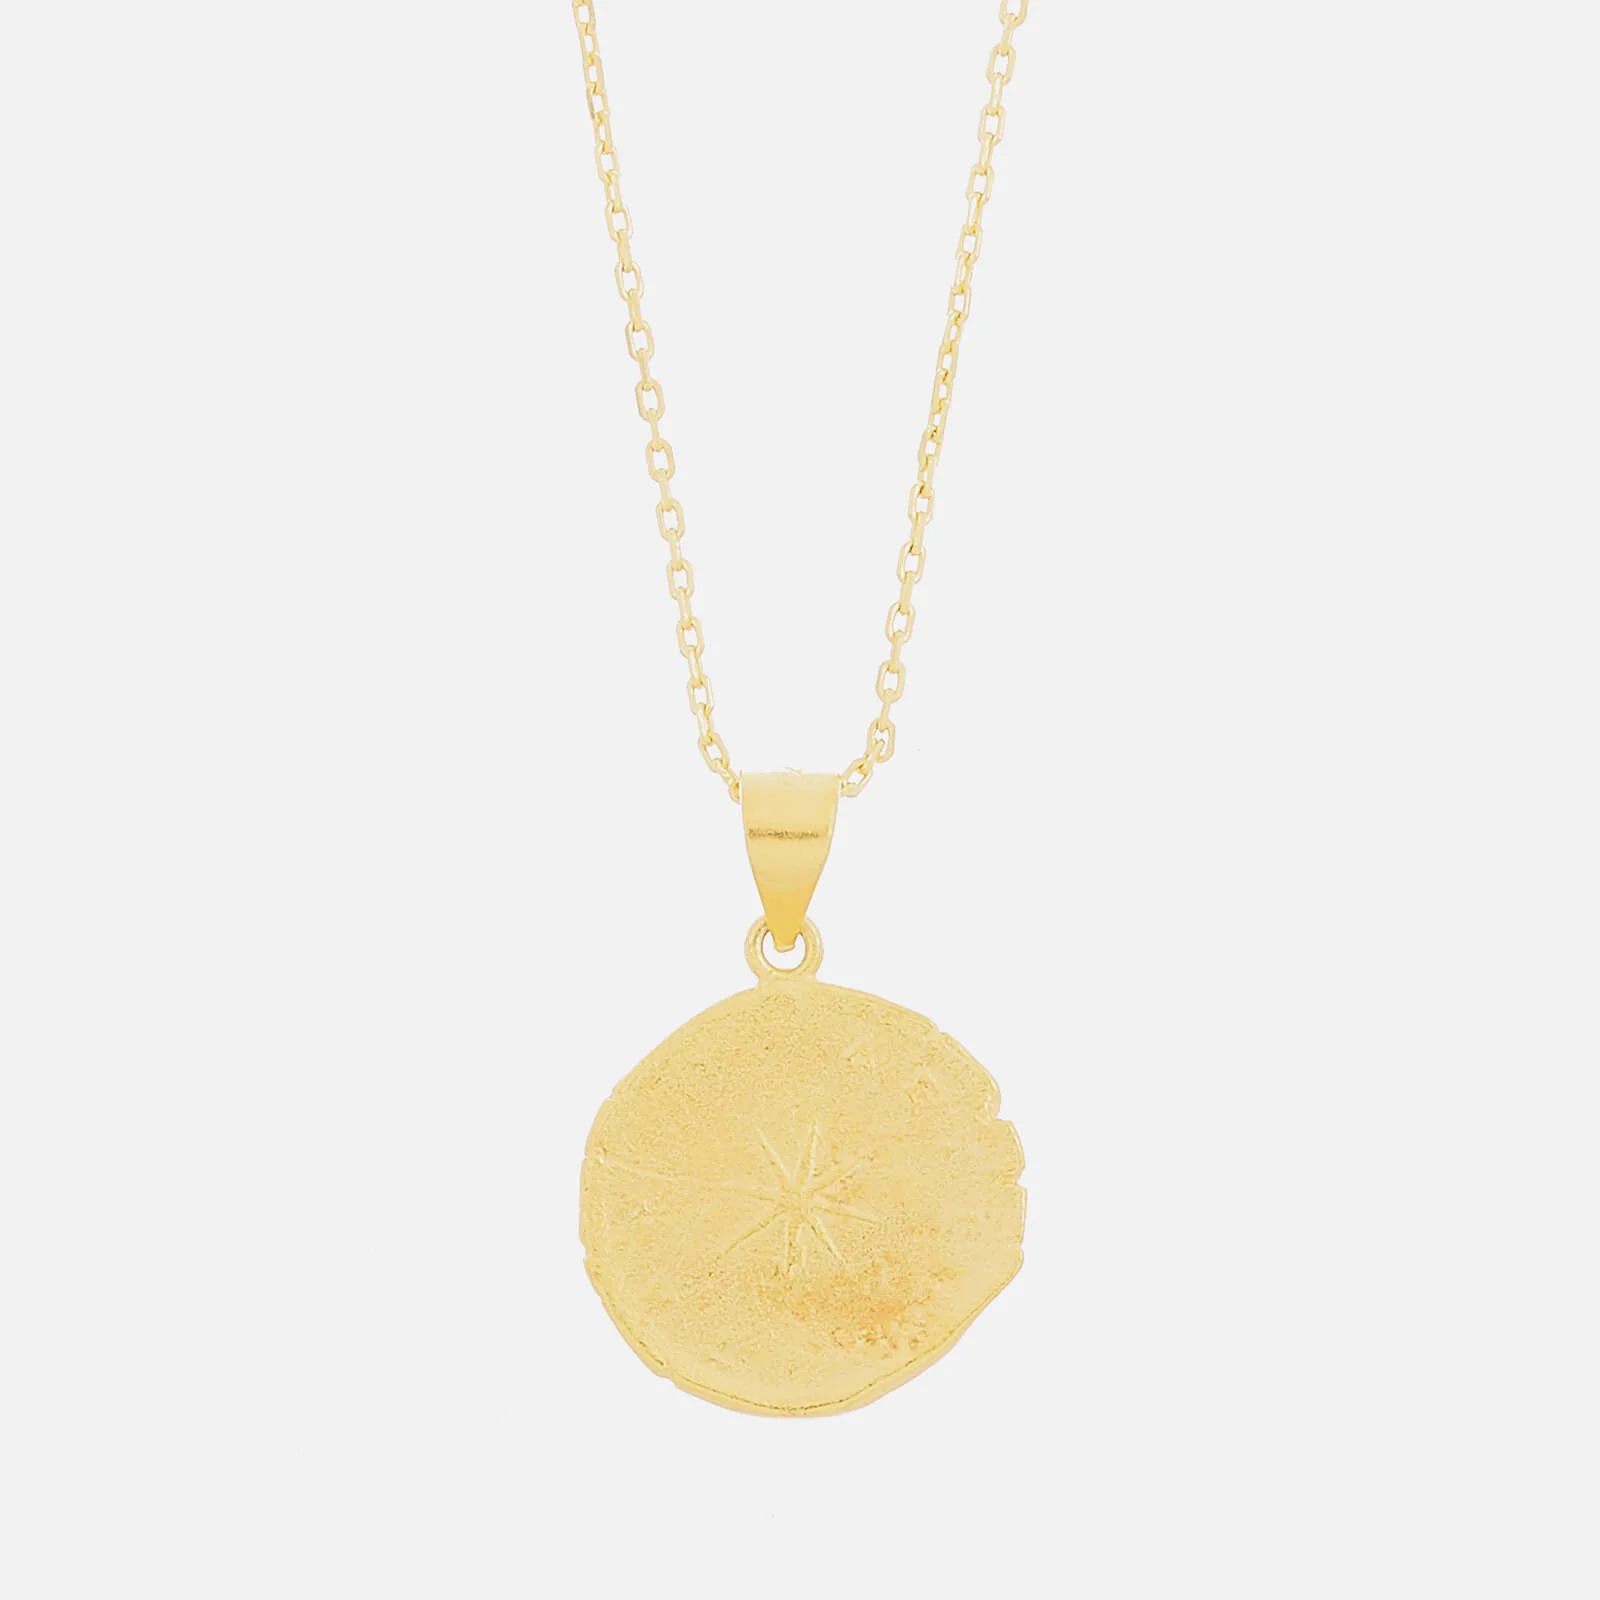 Anni Lu Women's From Paris Necklace - Gold Image 1